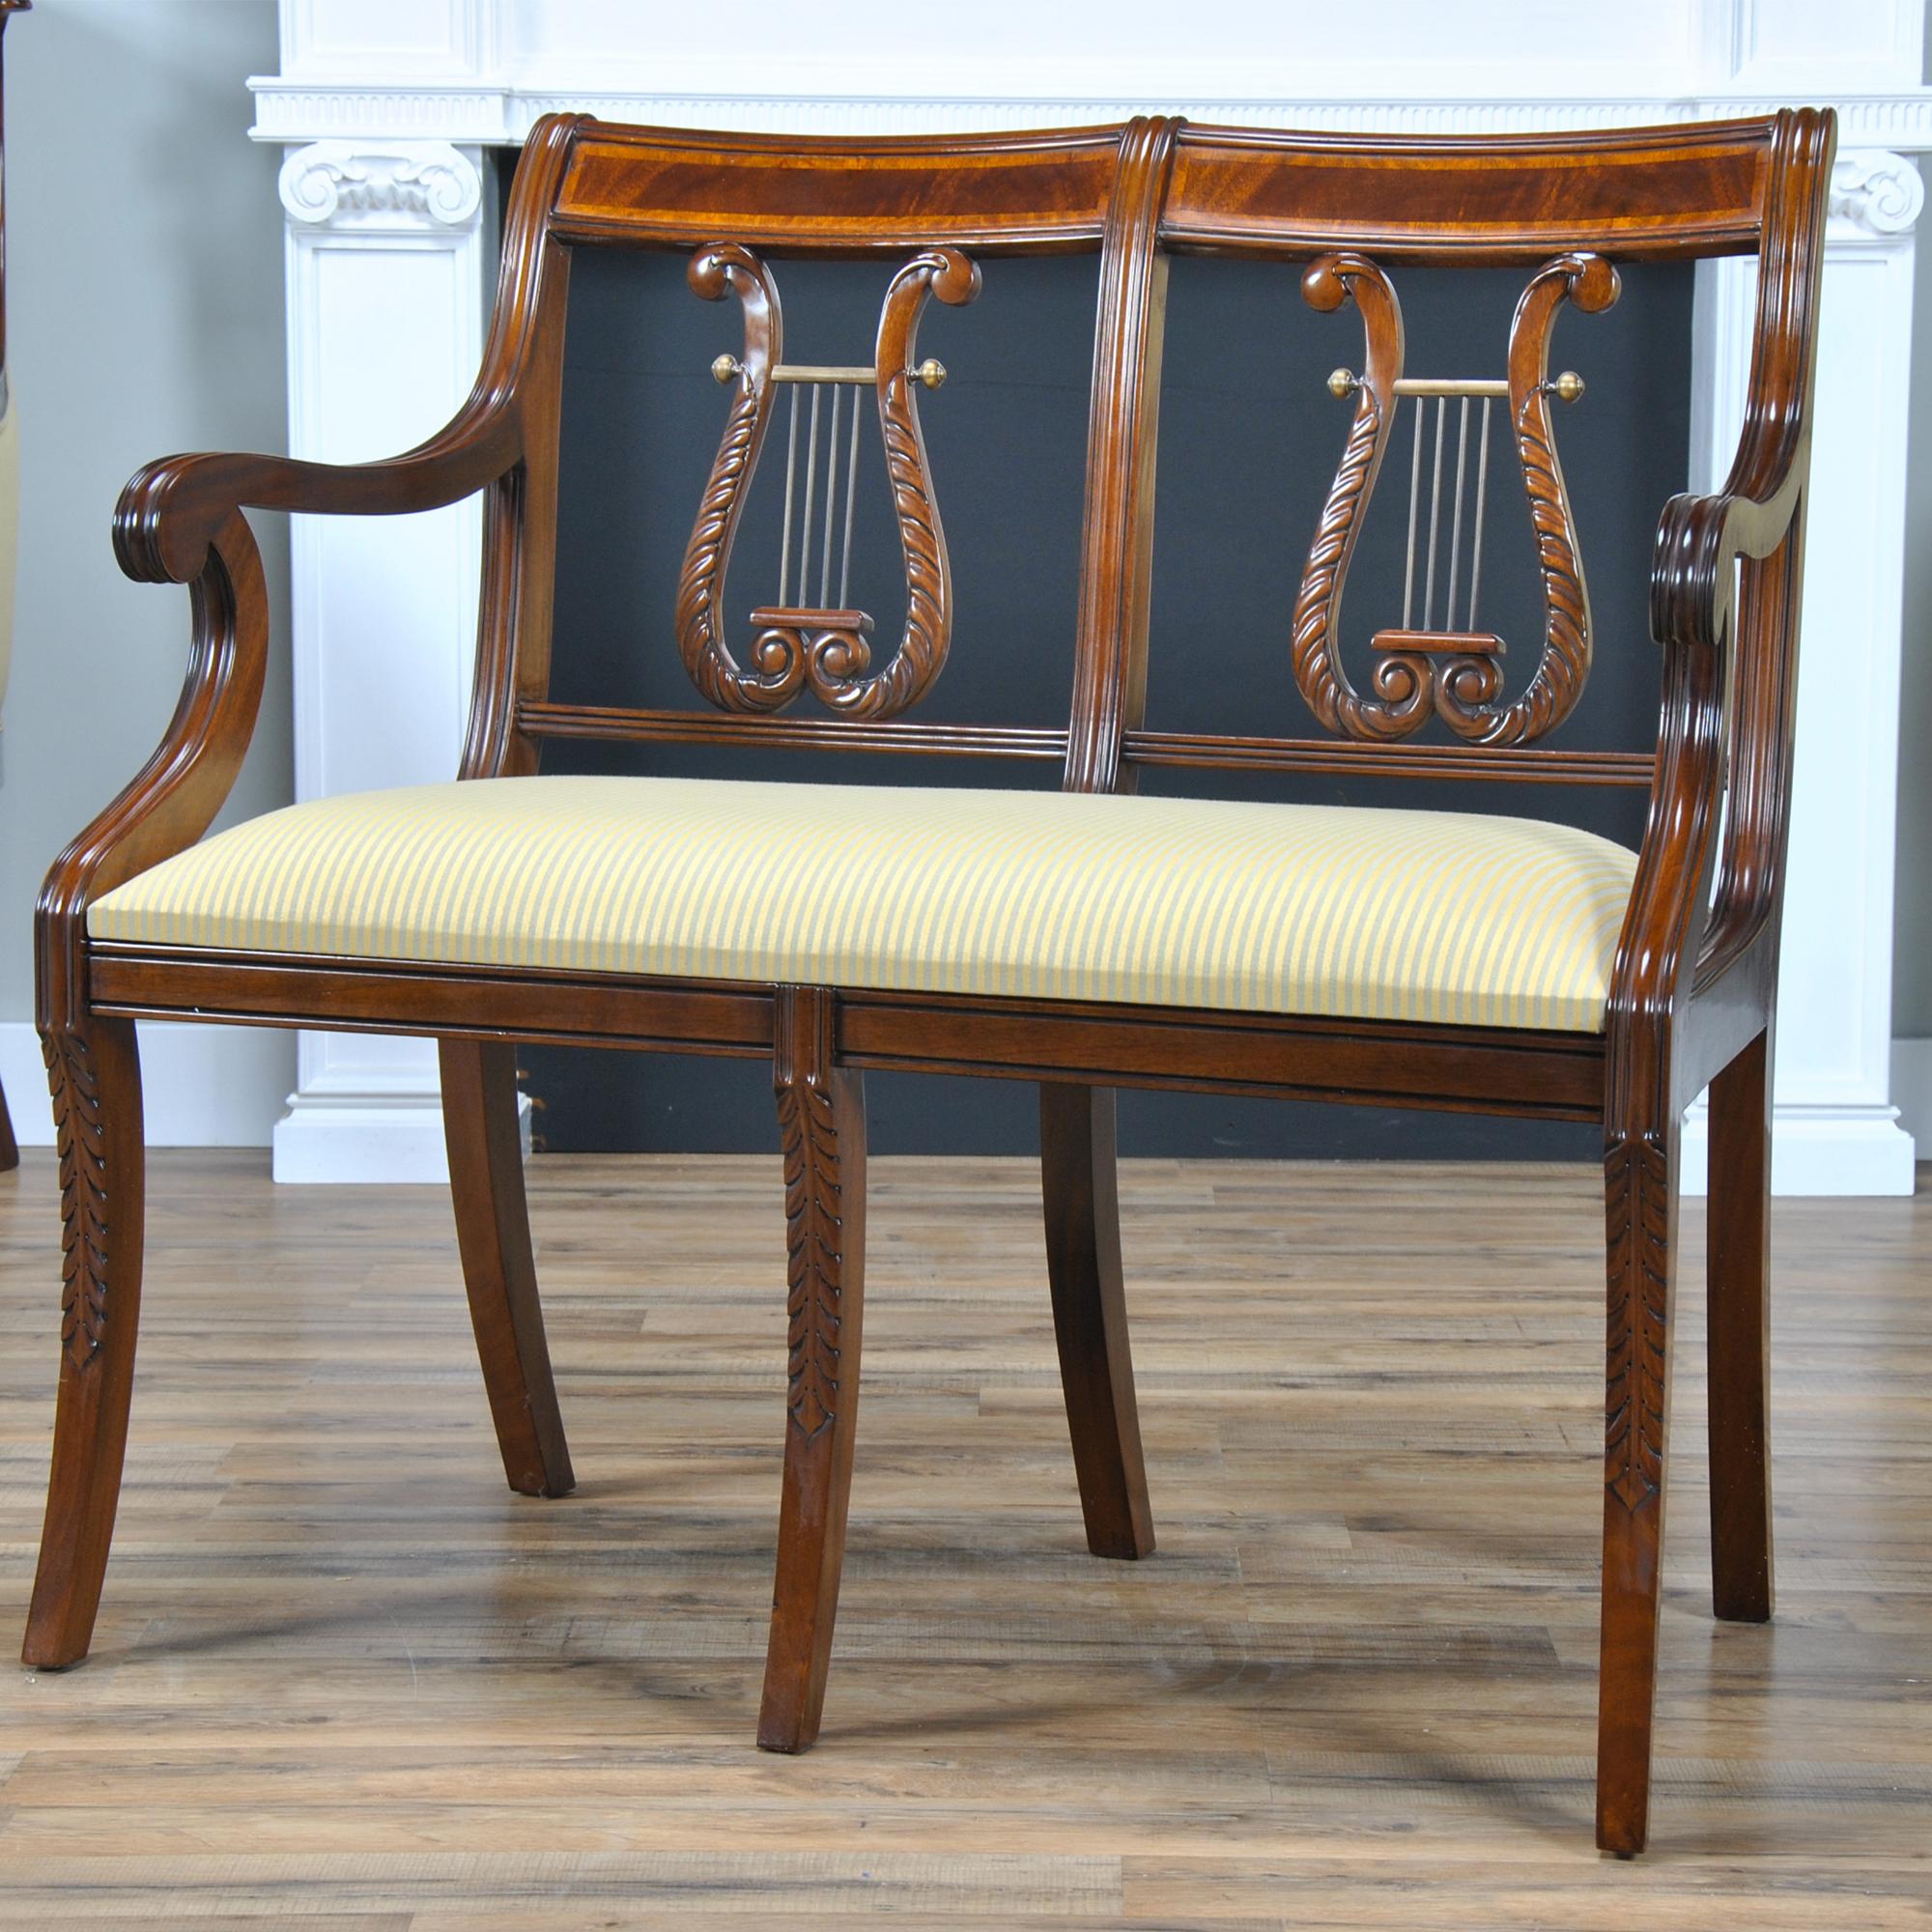 A fine quality, hand carved, solid mahogany Banded Lyre Back Two Seat Chair. Features include a figural mahogany crest rail surrounded by satinwood banding, lyre carved back splat with brass decorations, and legs featuring federal style carvings